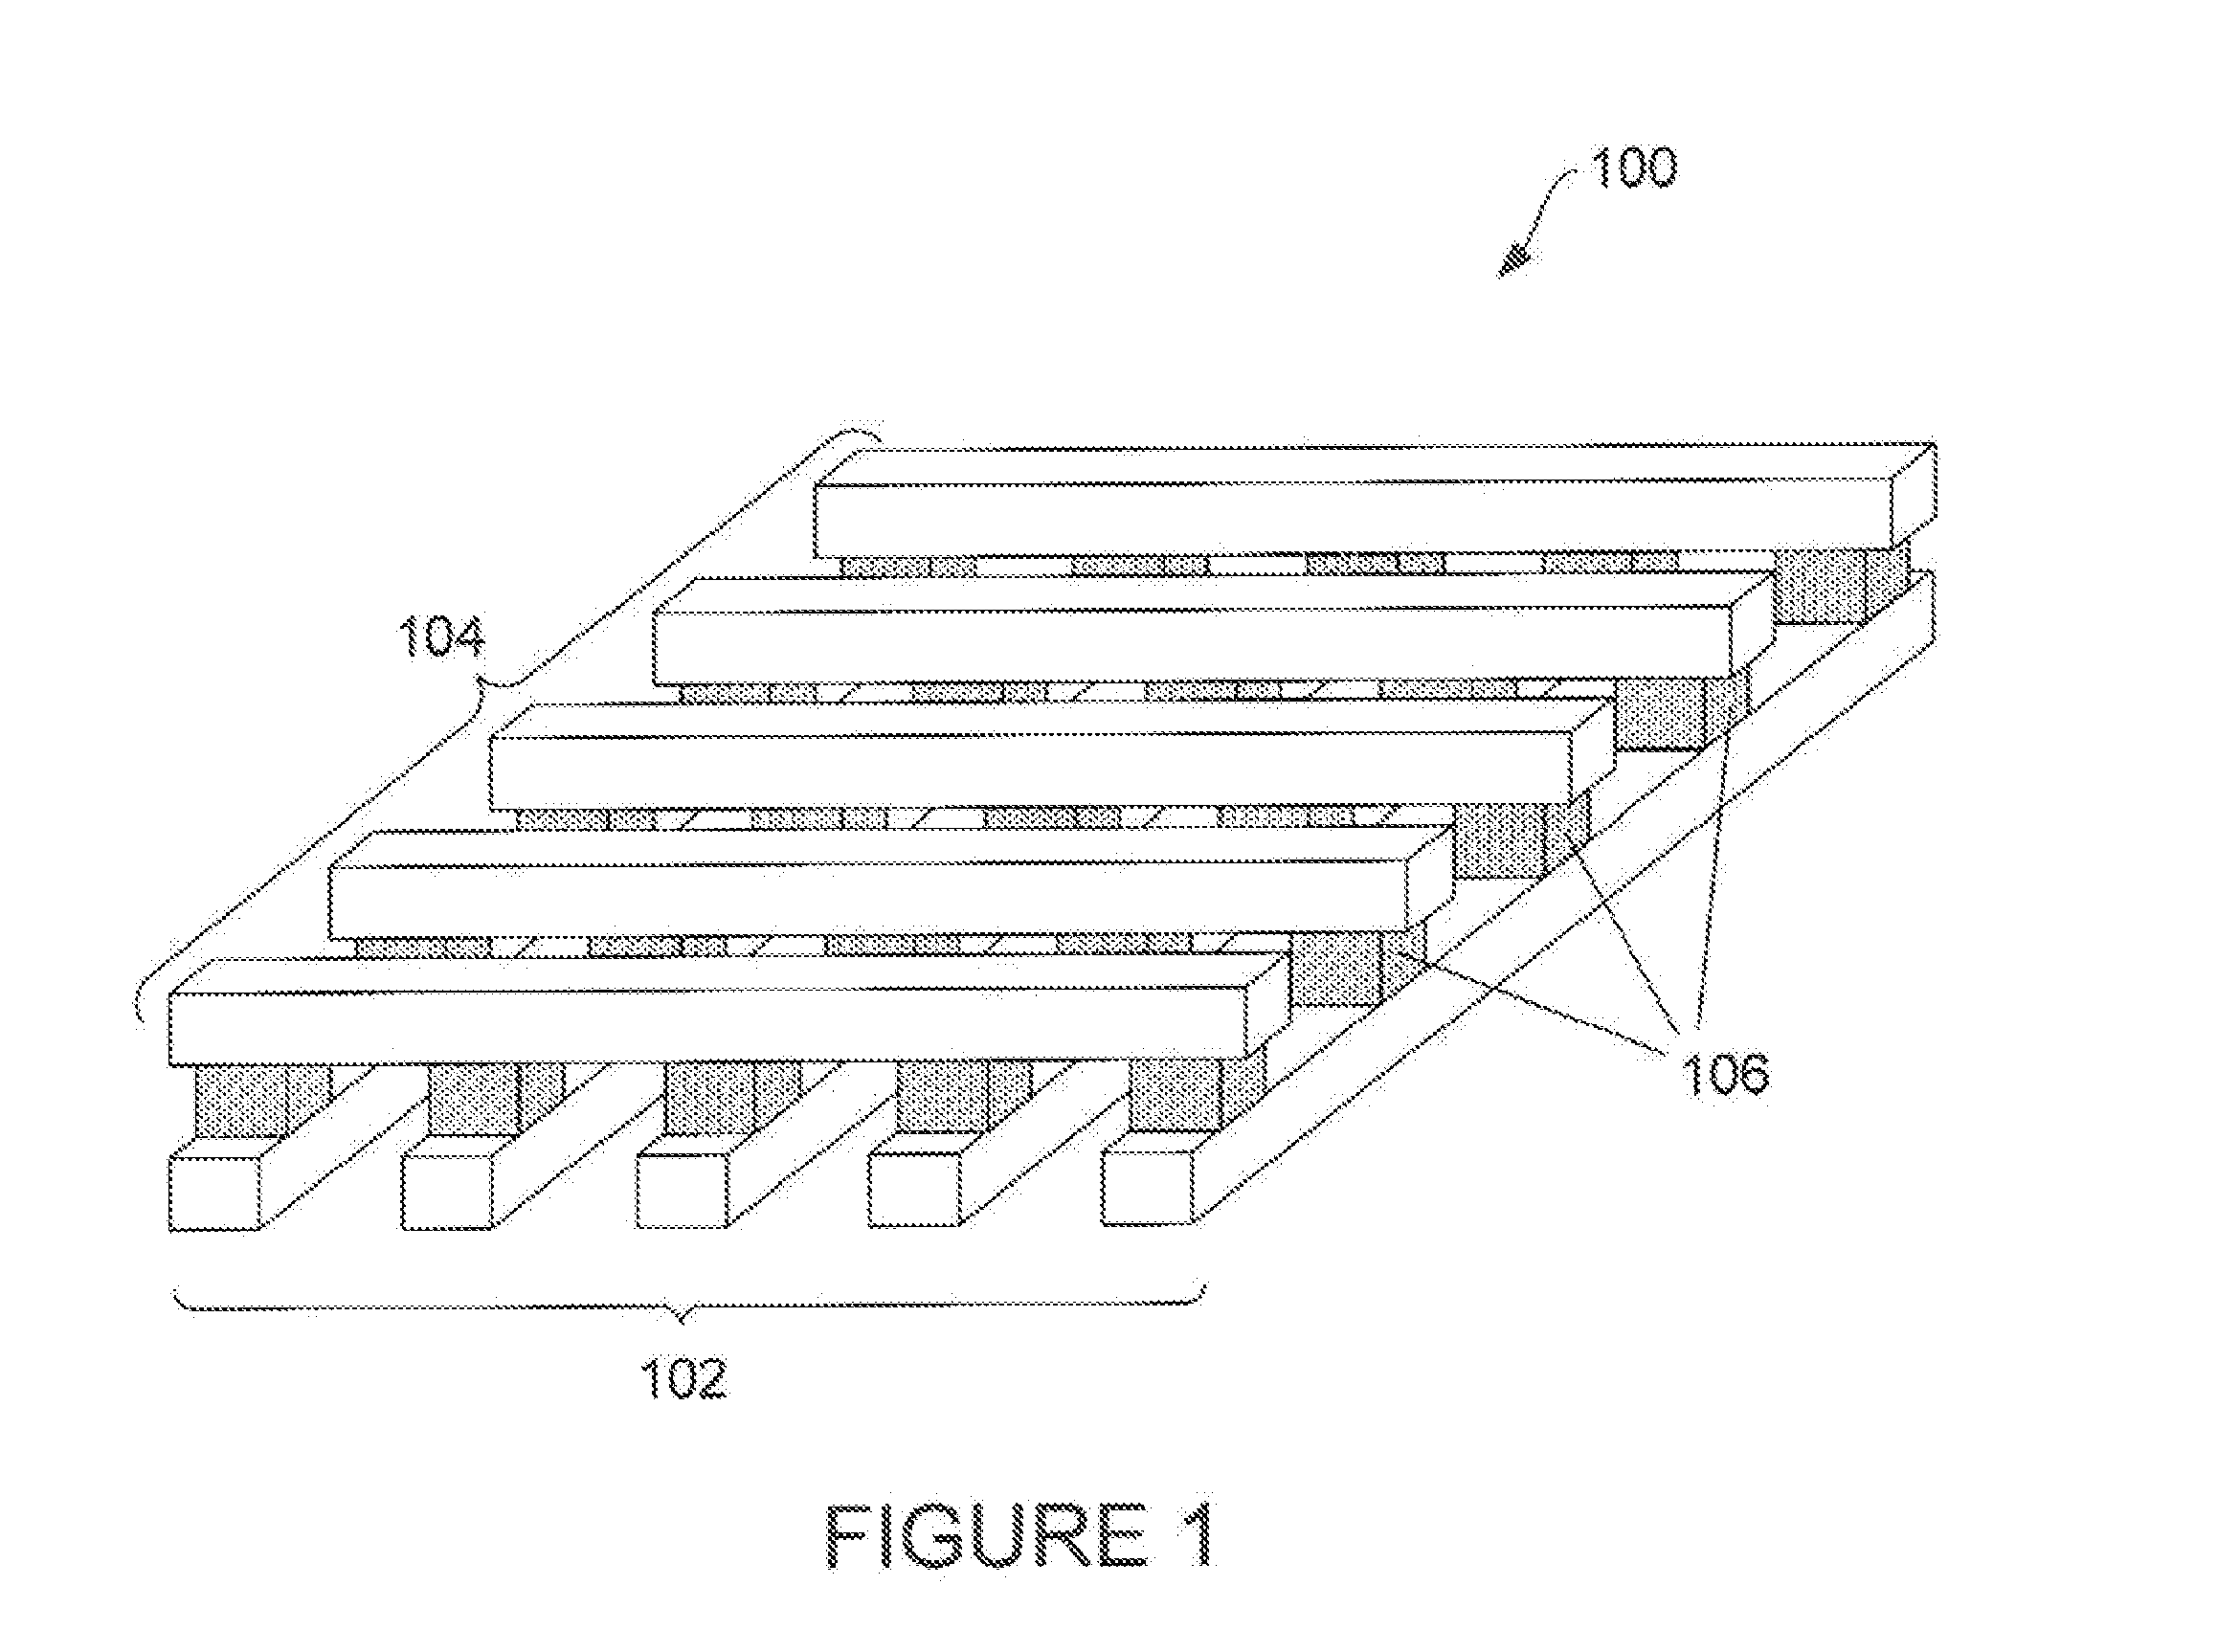 Systems and methods for row-wire voltage-loss compensation in crossbar arrays